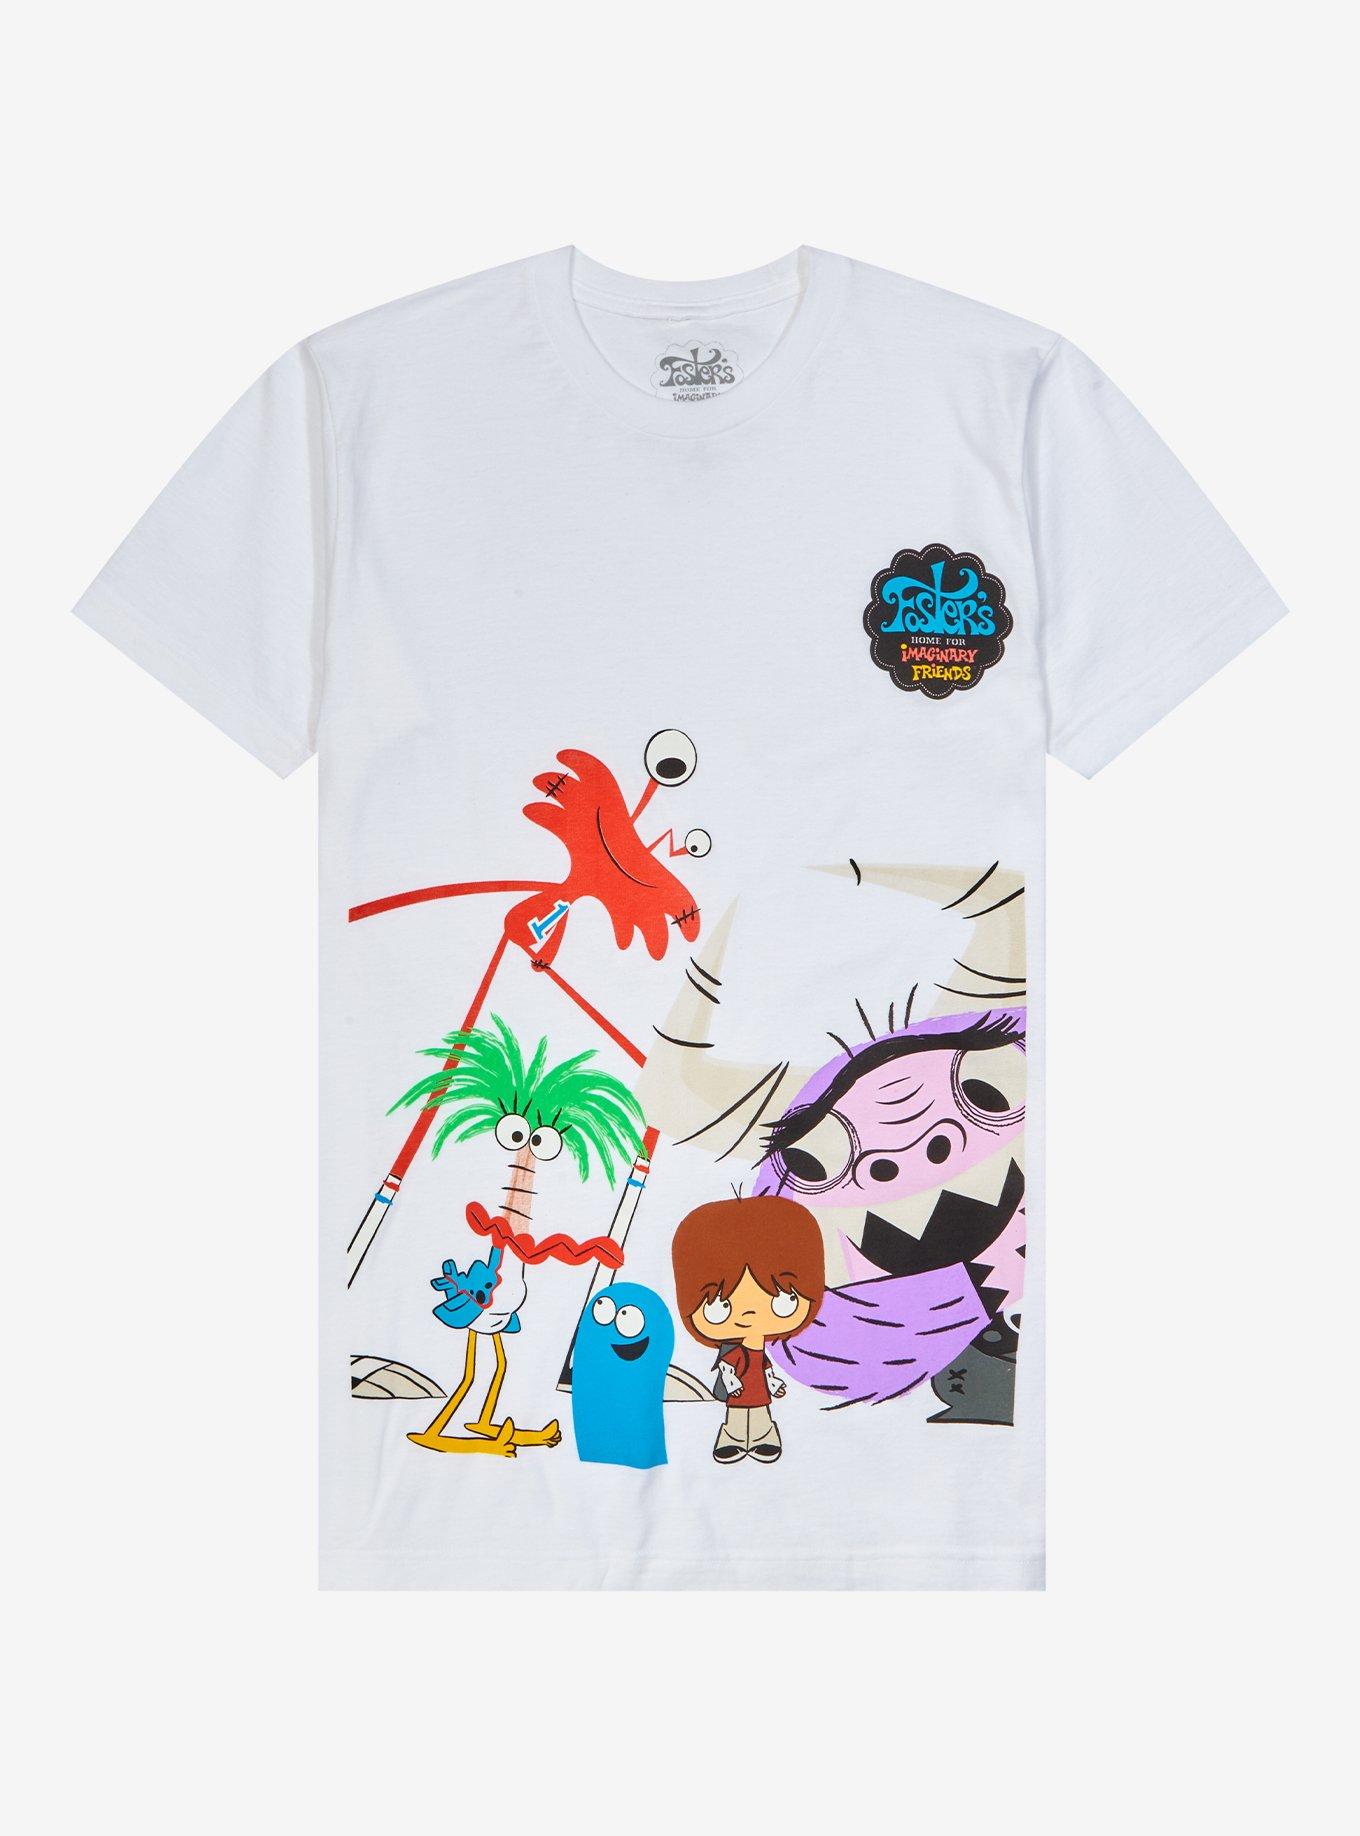 Foster's Home For Imaginary Friends Jumbo Group T-Shirt